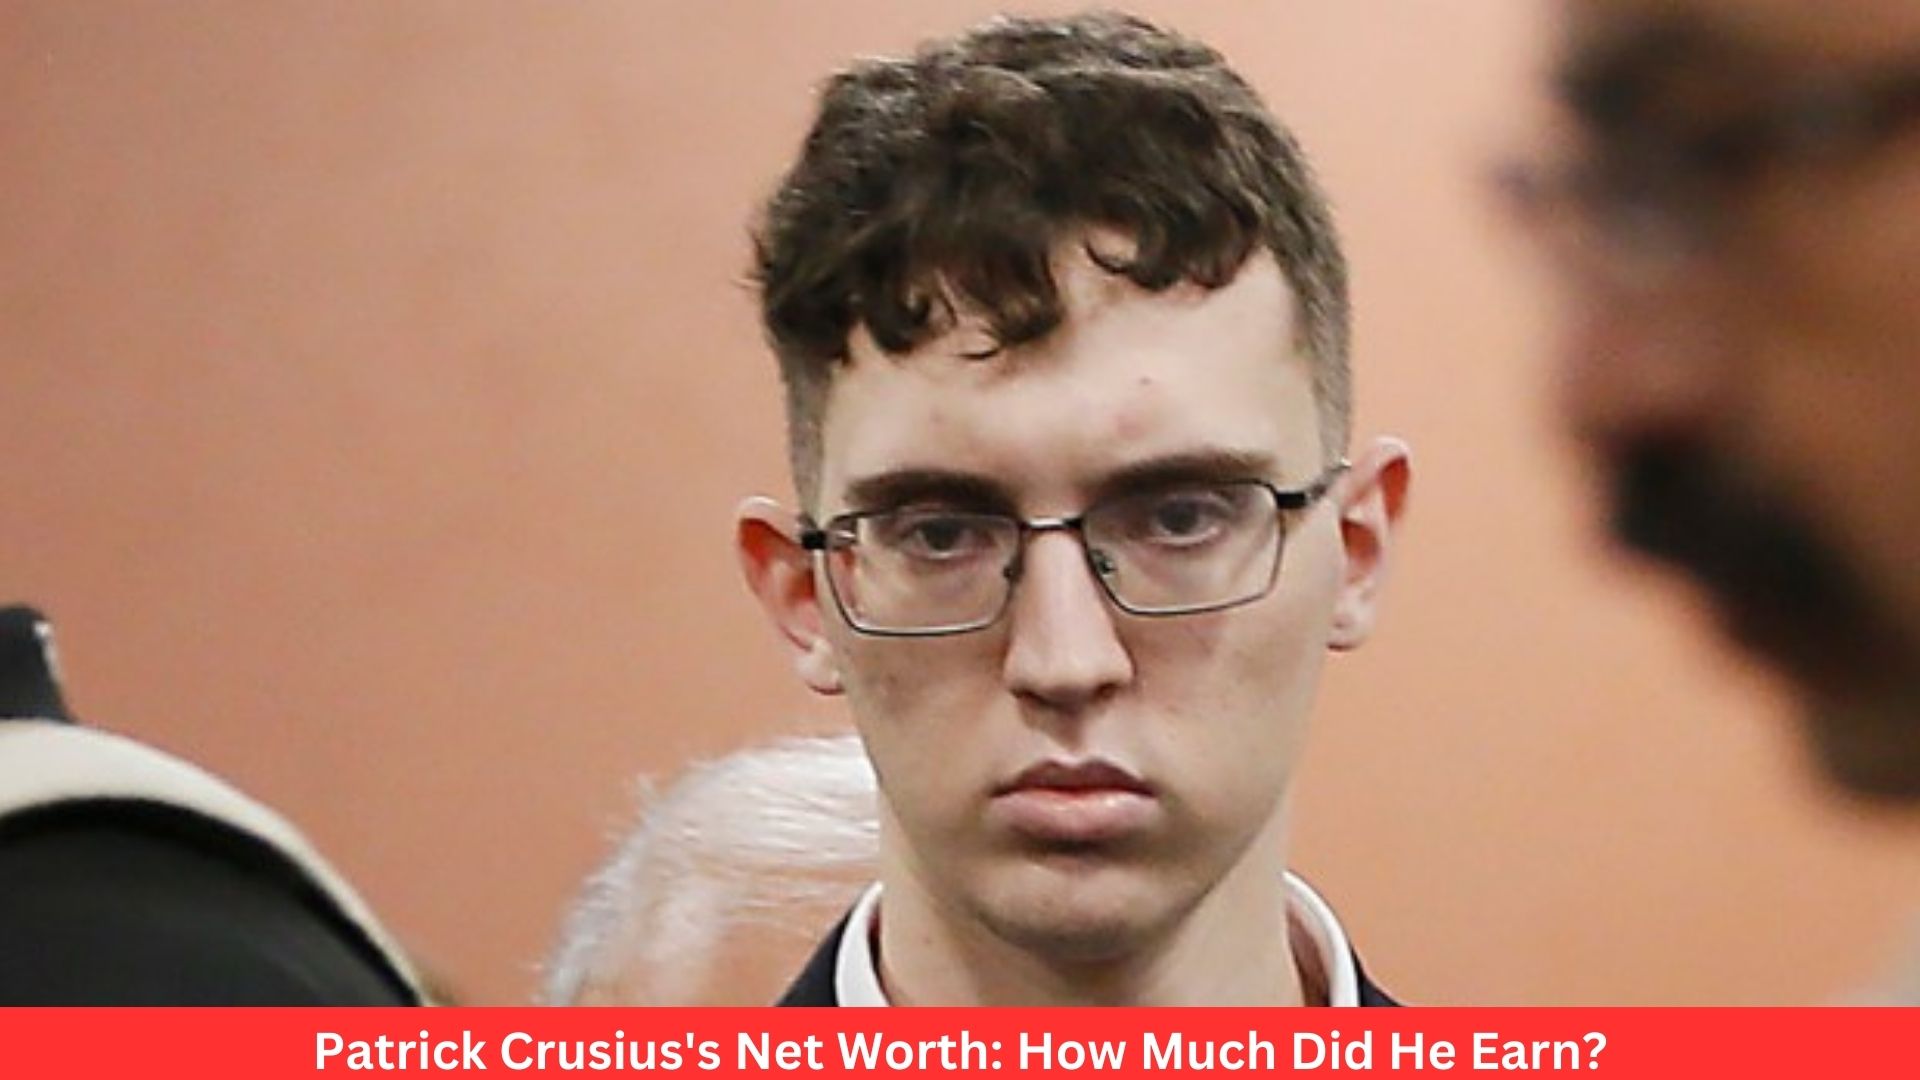 Patrick Crusius's Net Worth: How Much Did He Earn?